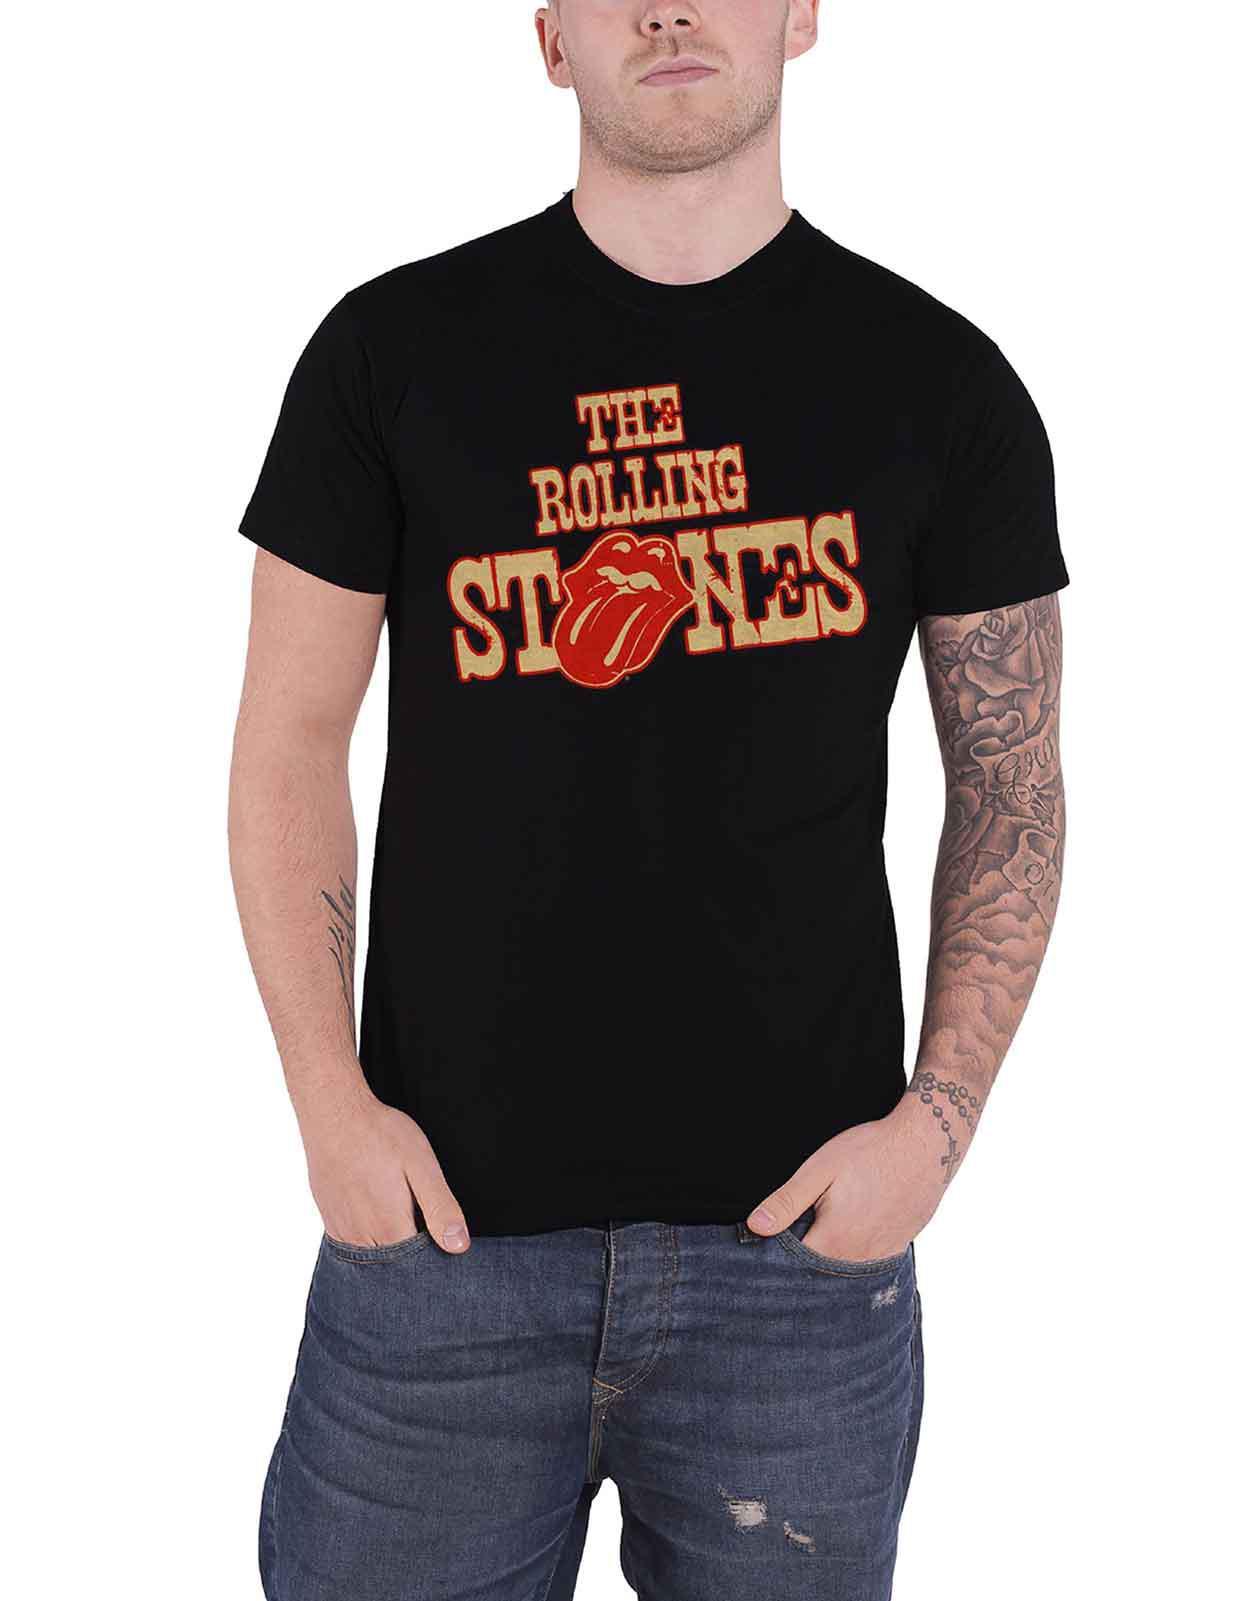 The Rolling Stones T Shirt Wild West Logo new Official Mens Black